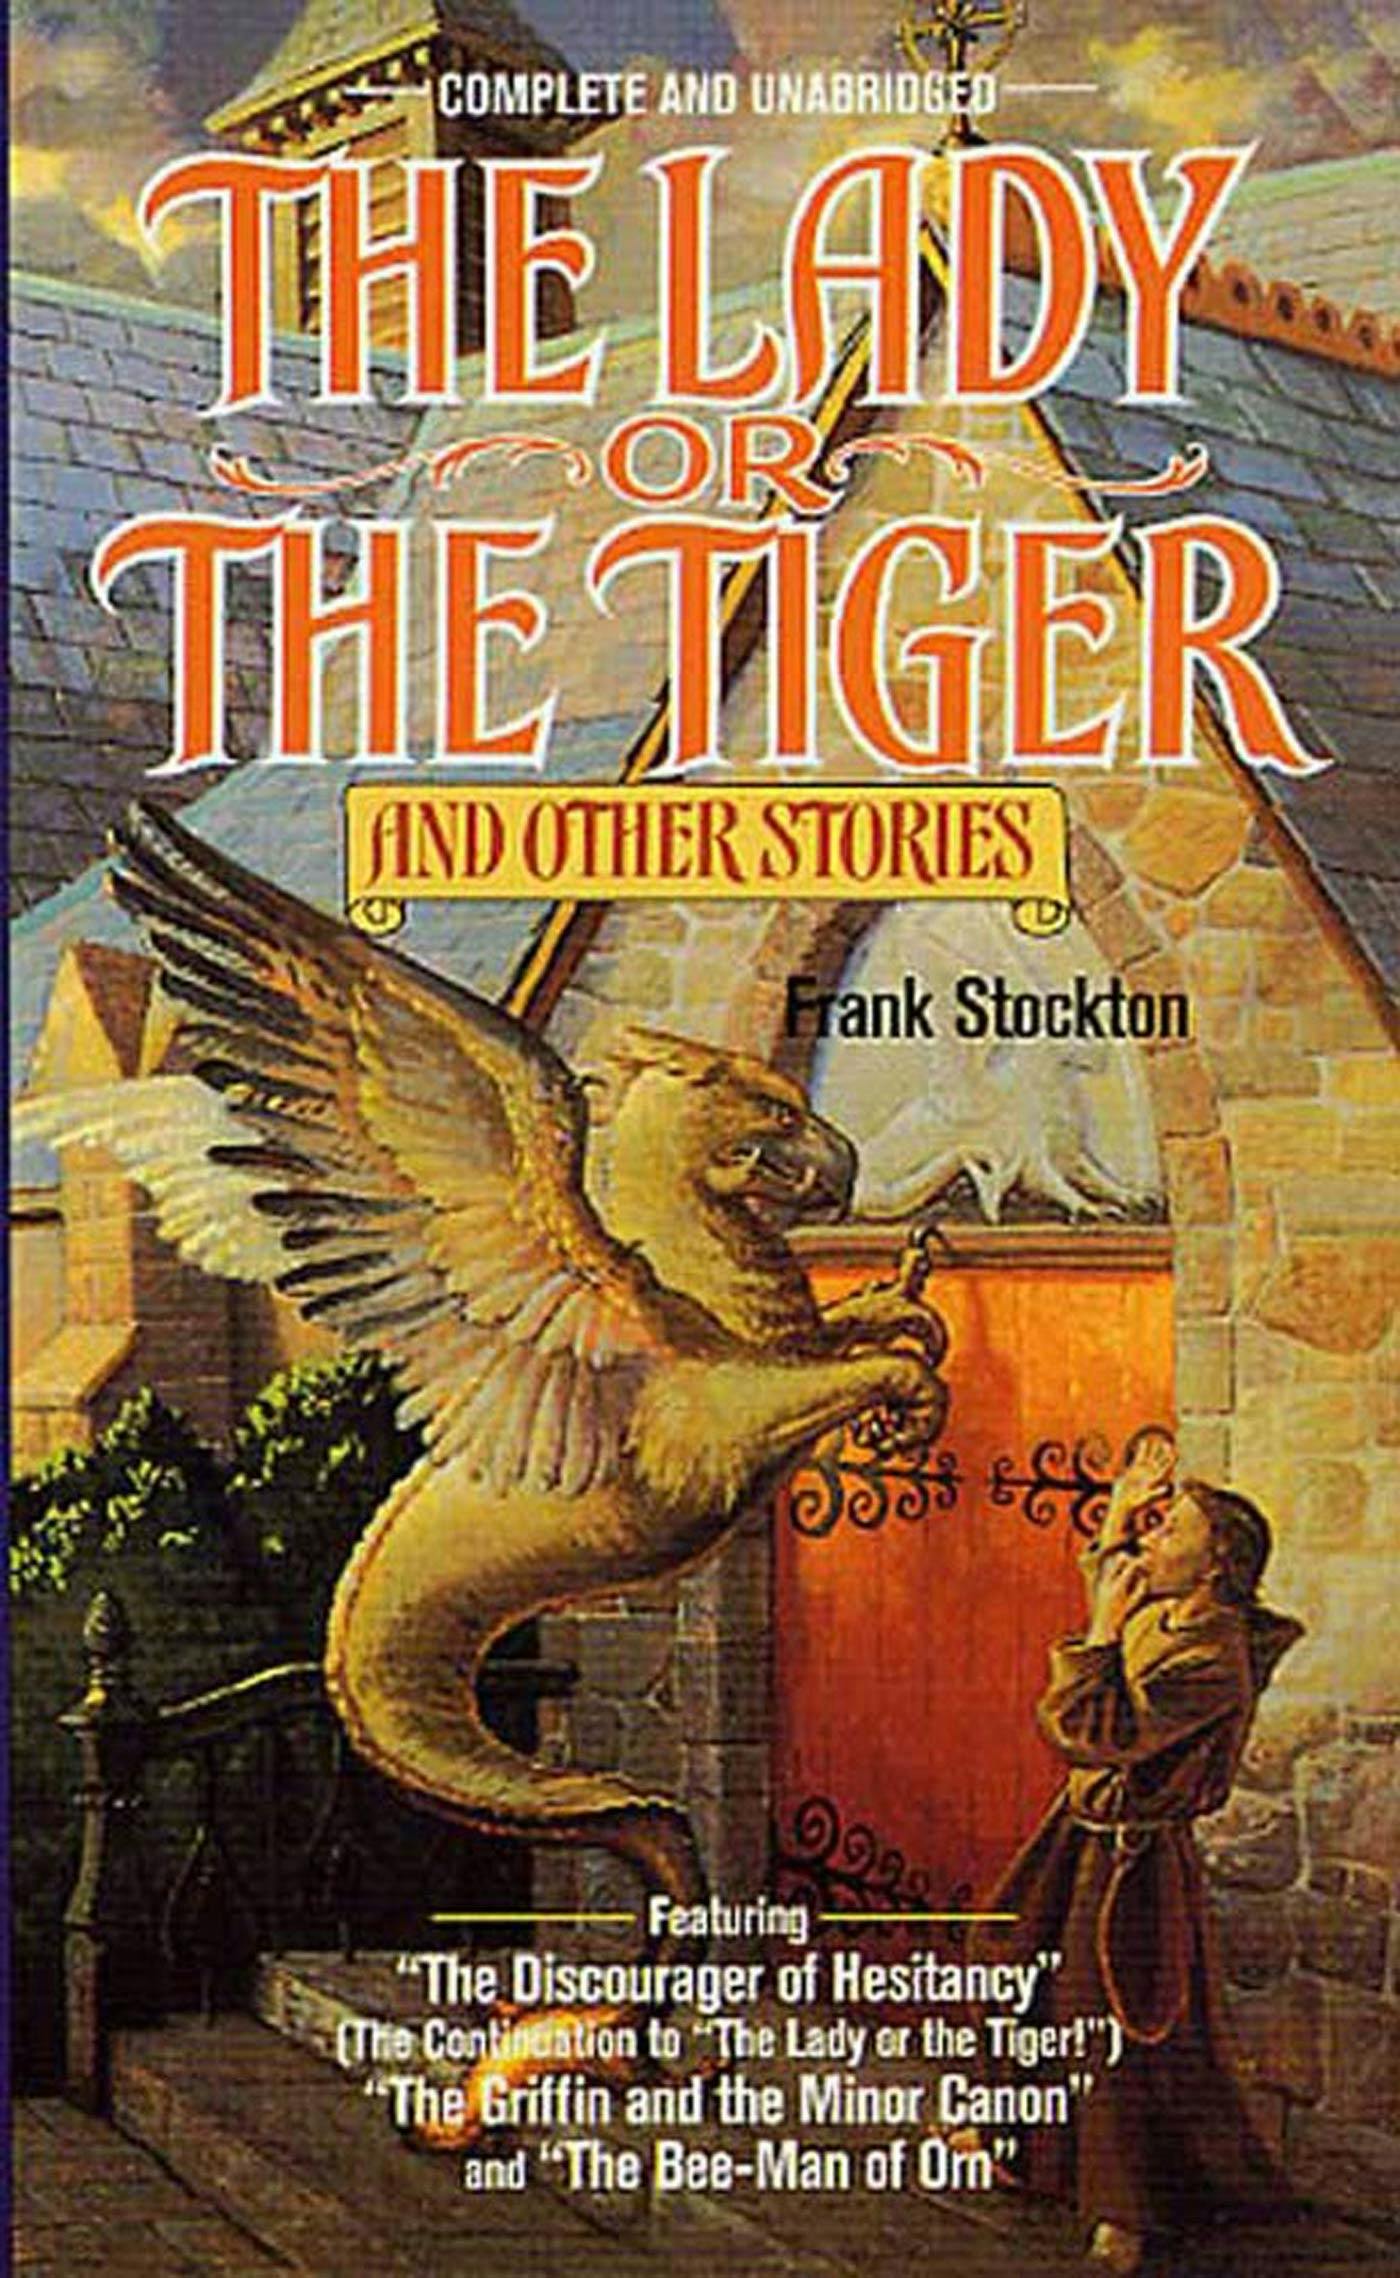 Image of The Lady or the Tiger and Other Short Stories